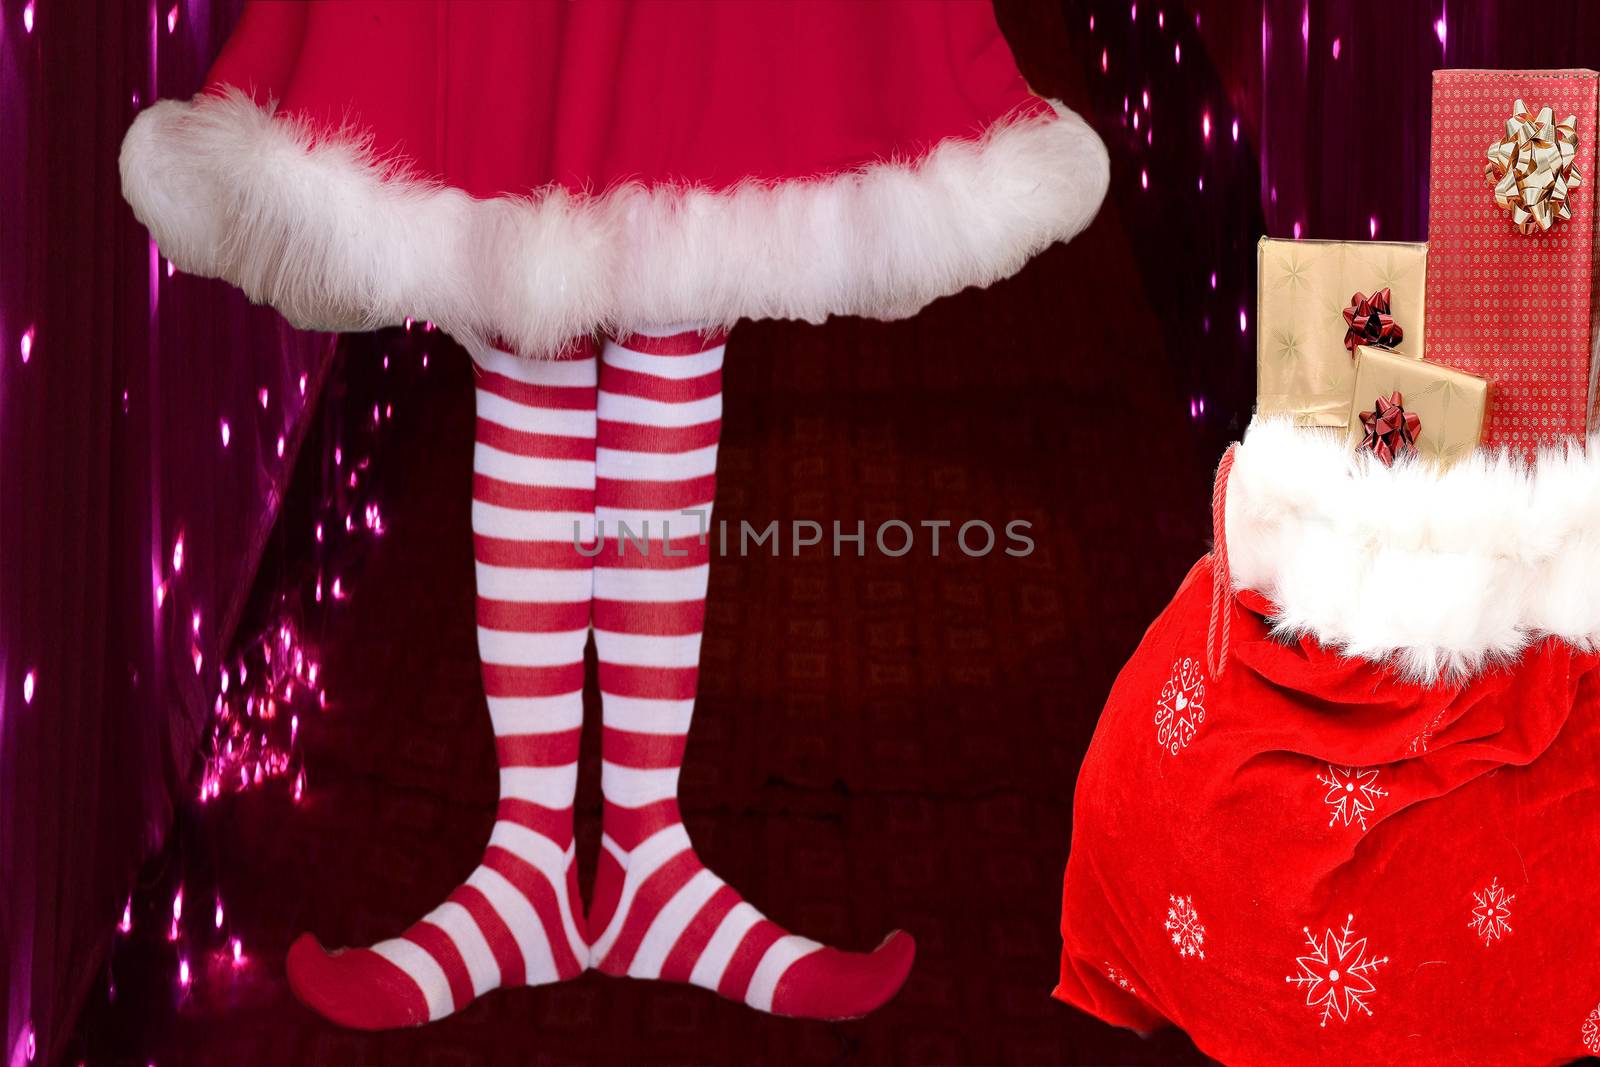 cute girl wearing red white striped elf stockings and a cute dress standing next to a santa claus bag full of presents on a background with christmas lights